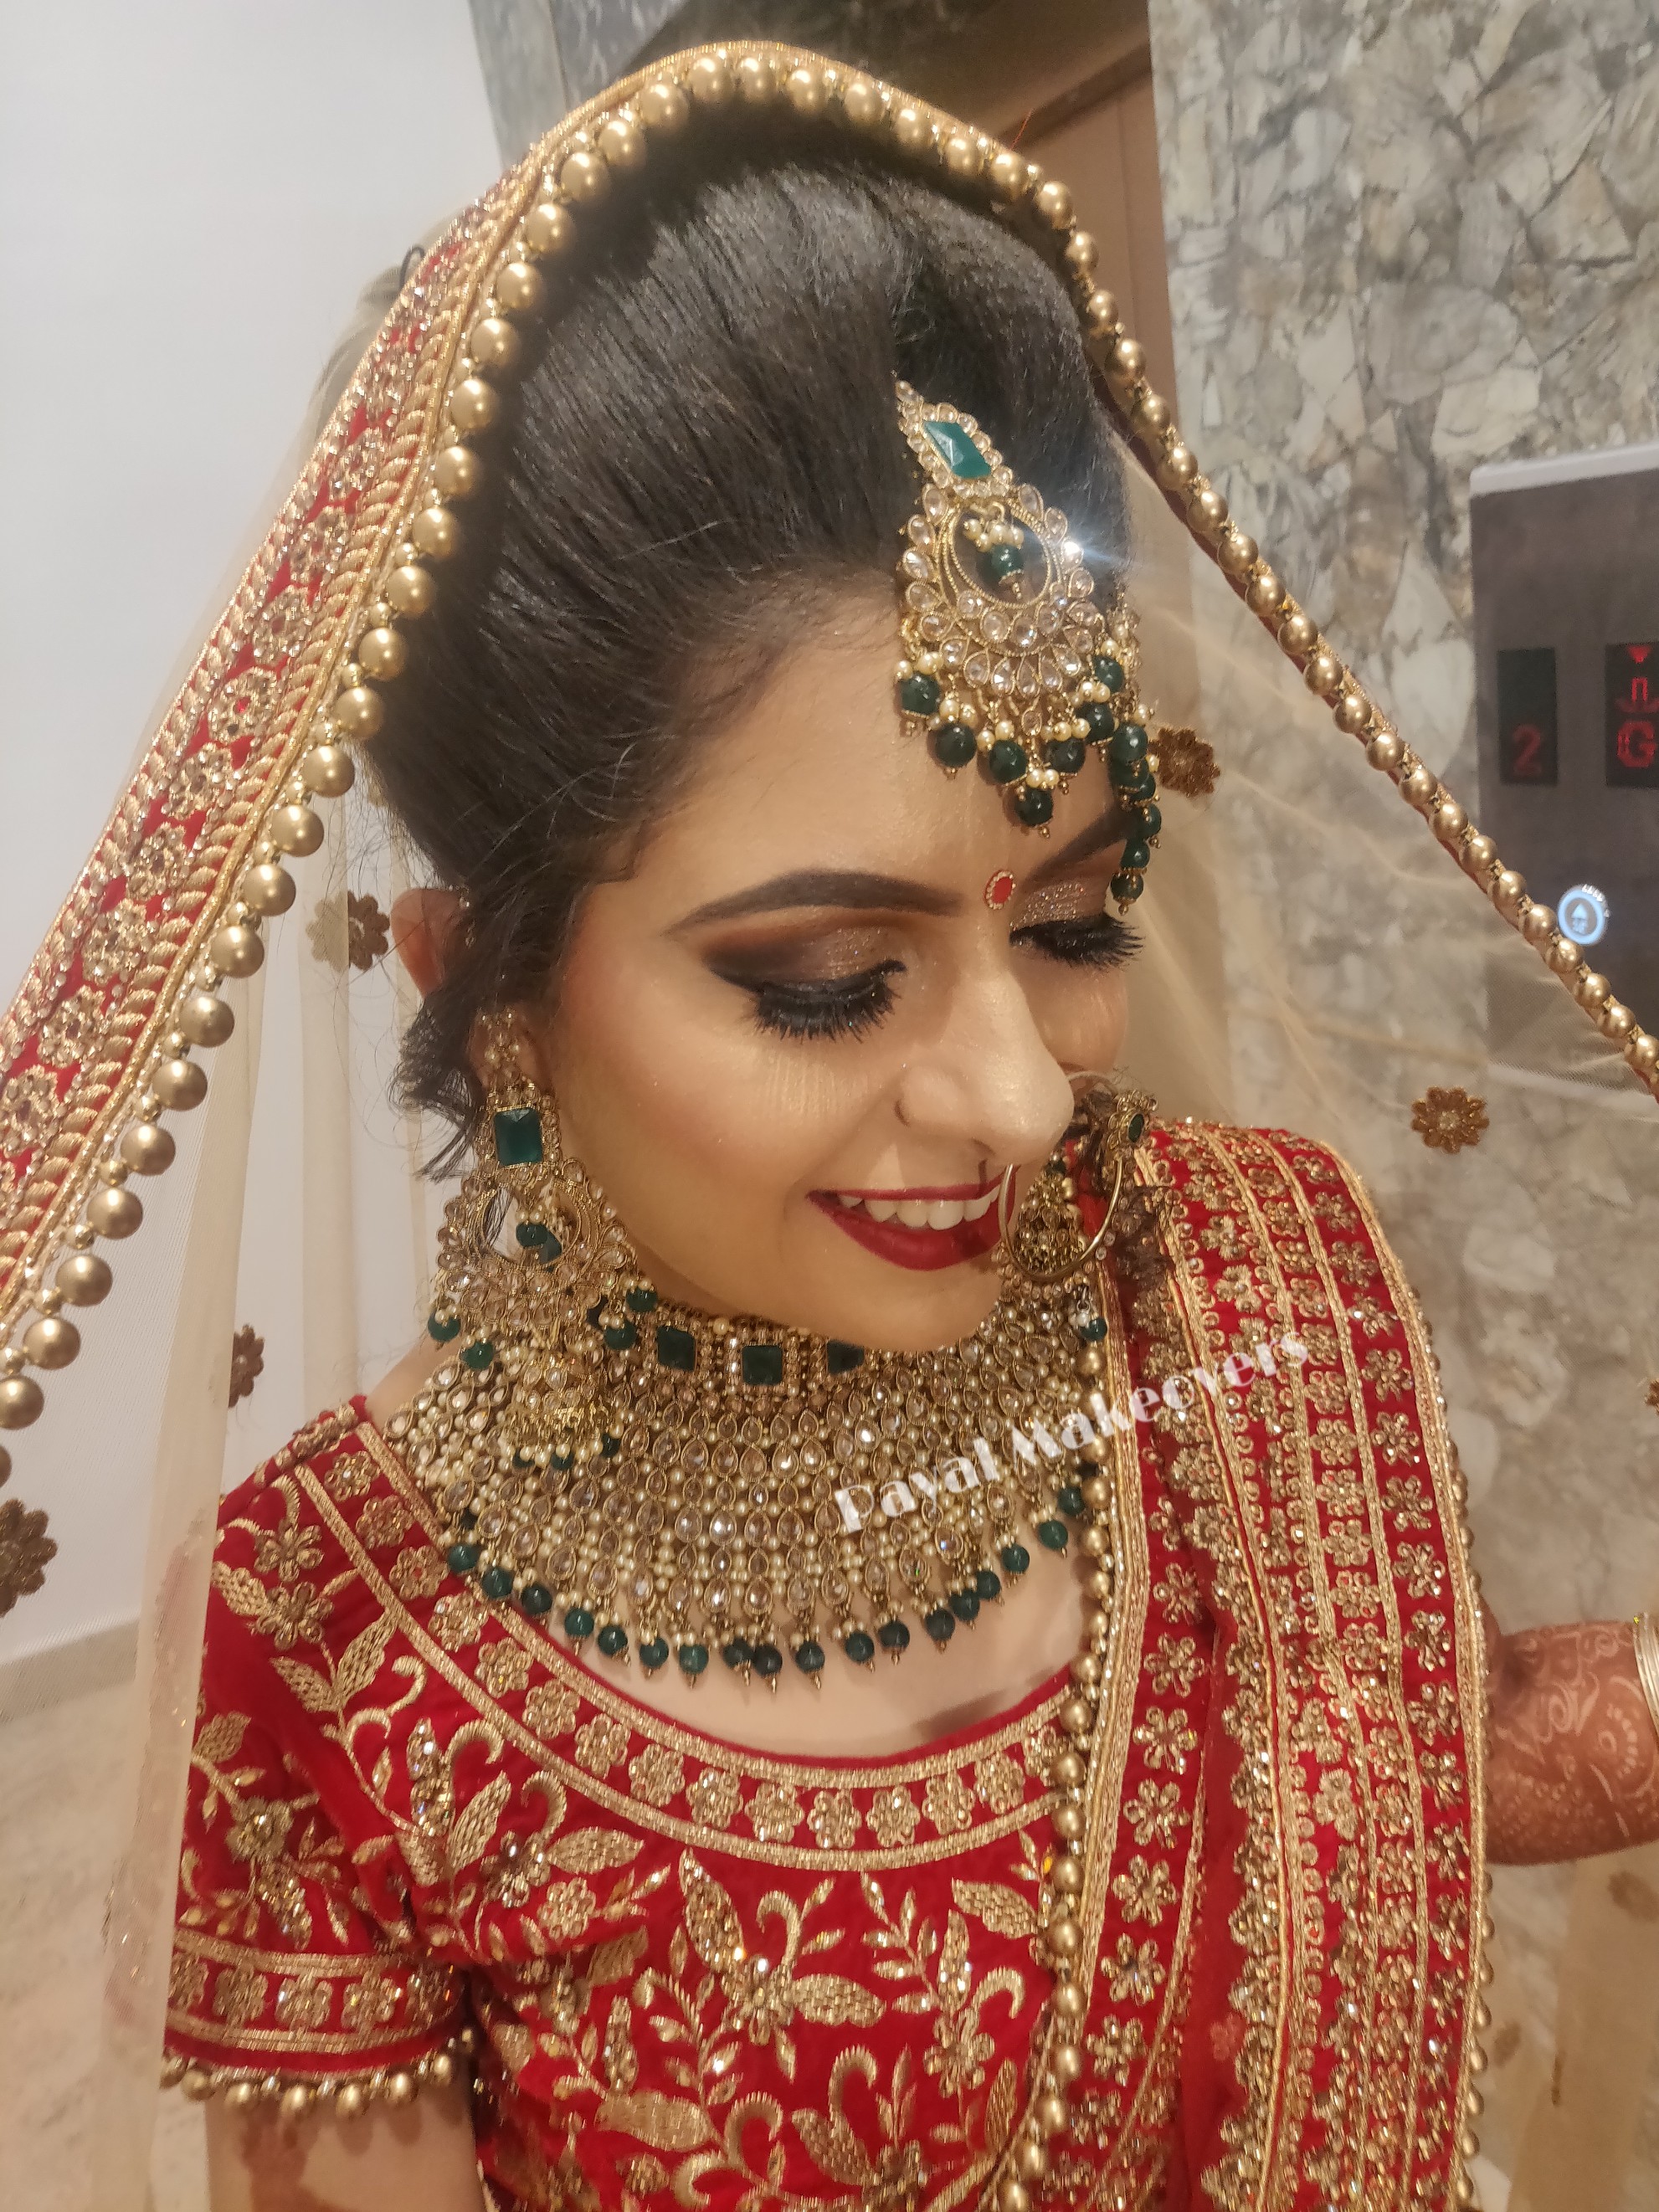 Payal Sharma Makeup Artist Services, Review and Info - Olready